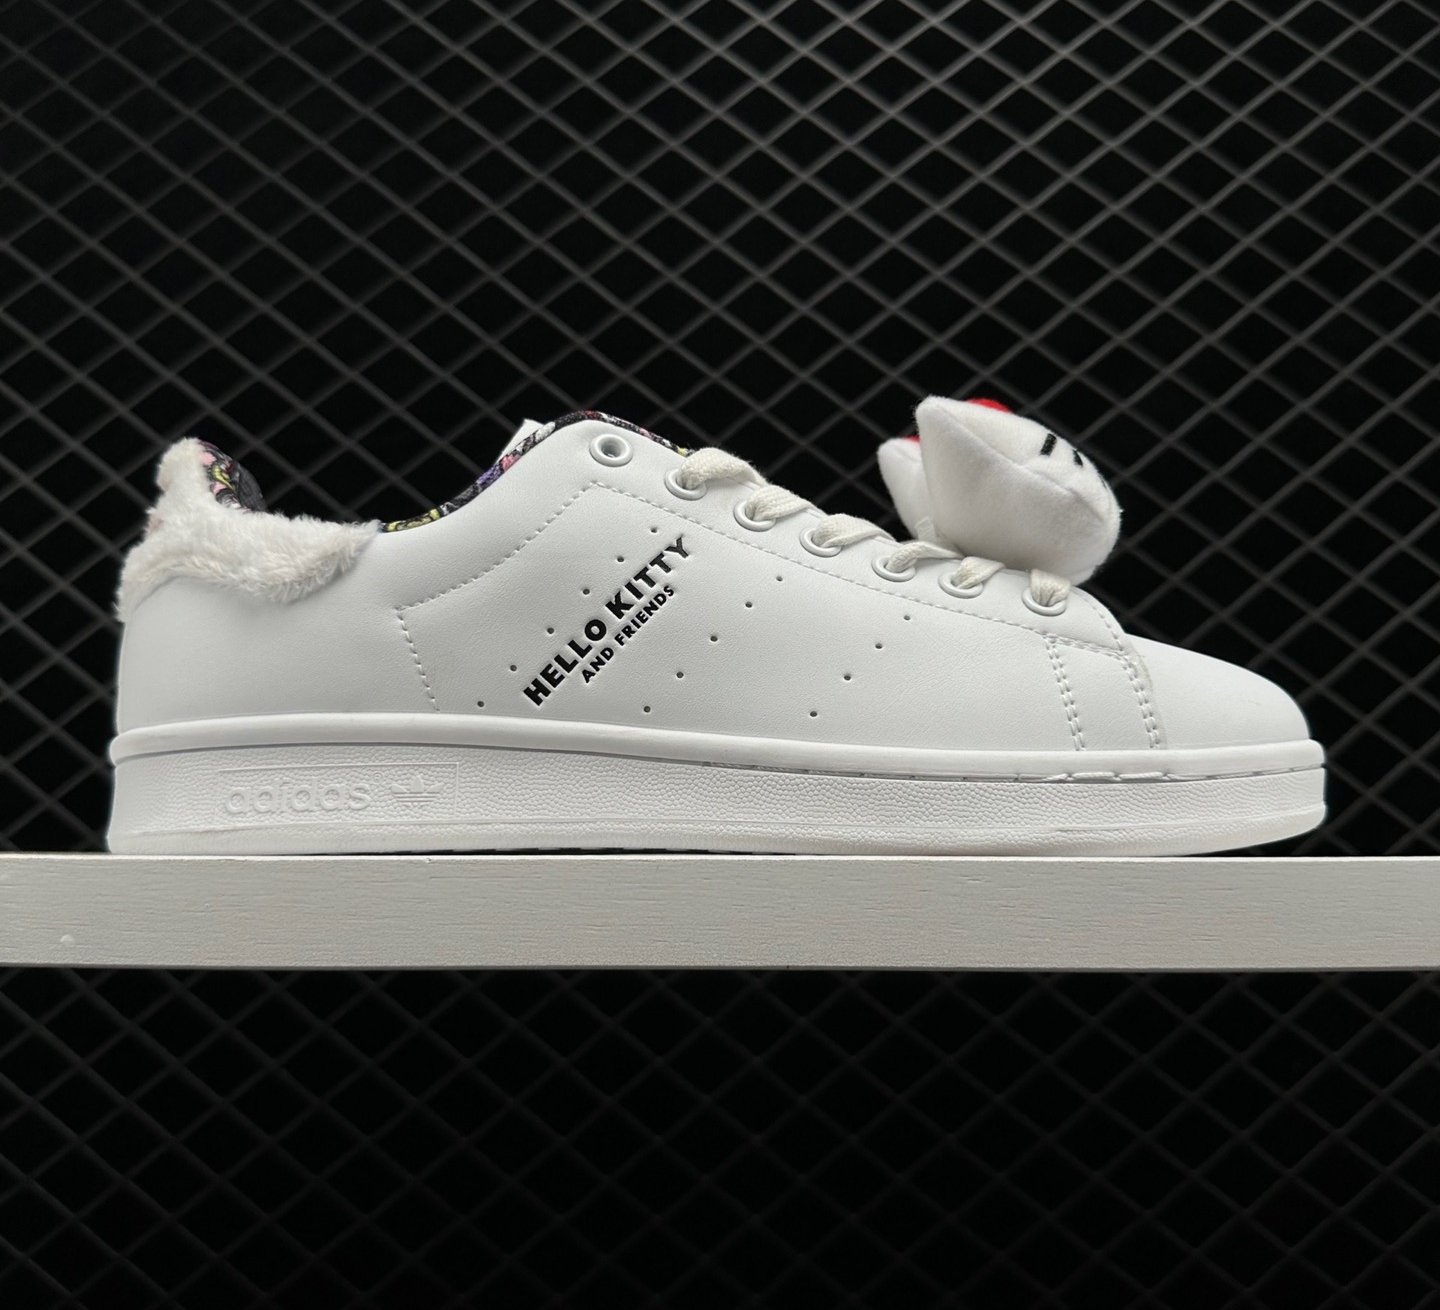 Adidas Originals Stan Smith x Hello Kitty 'Cloud White' - Limited Edition Collaboration Sneakers